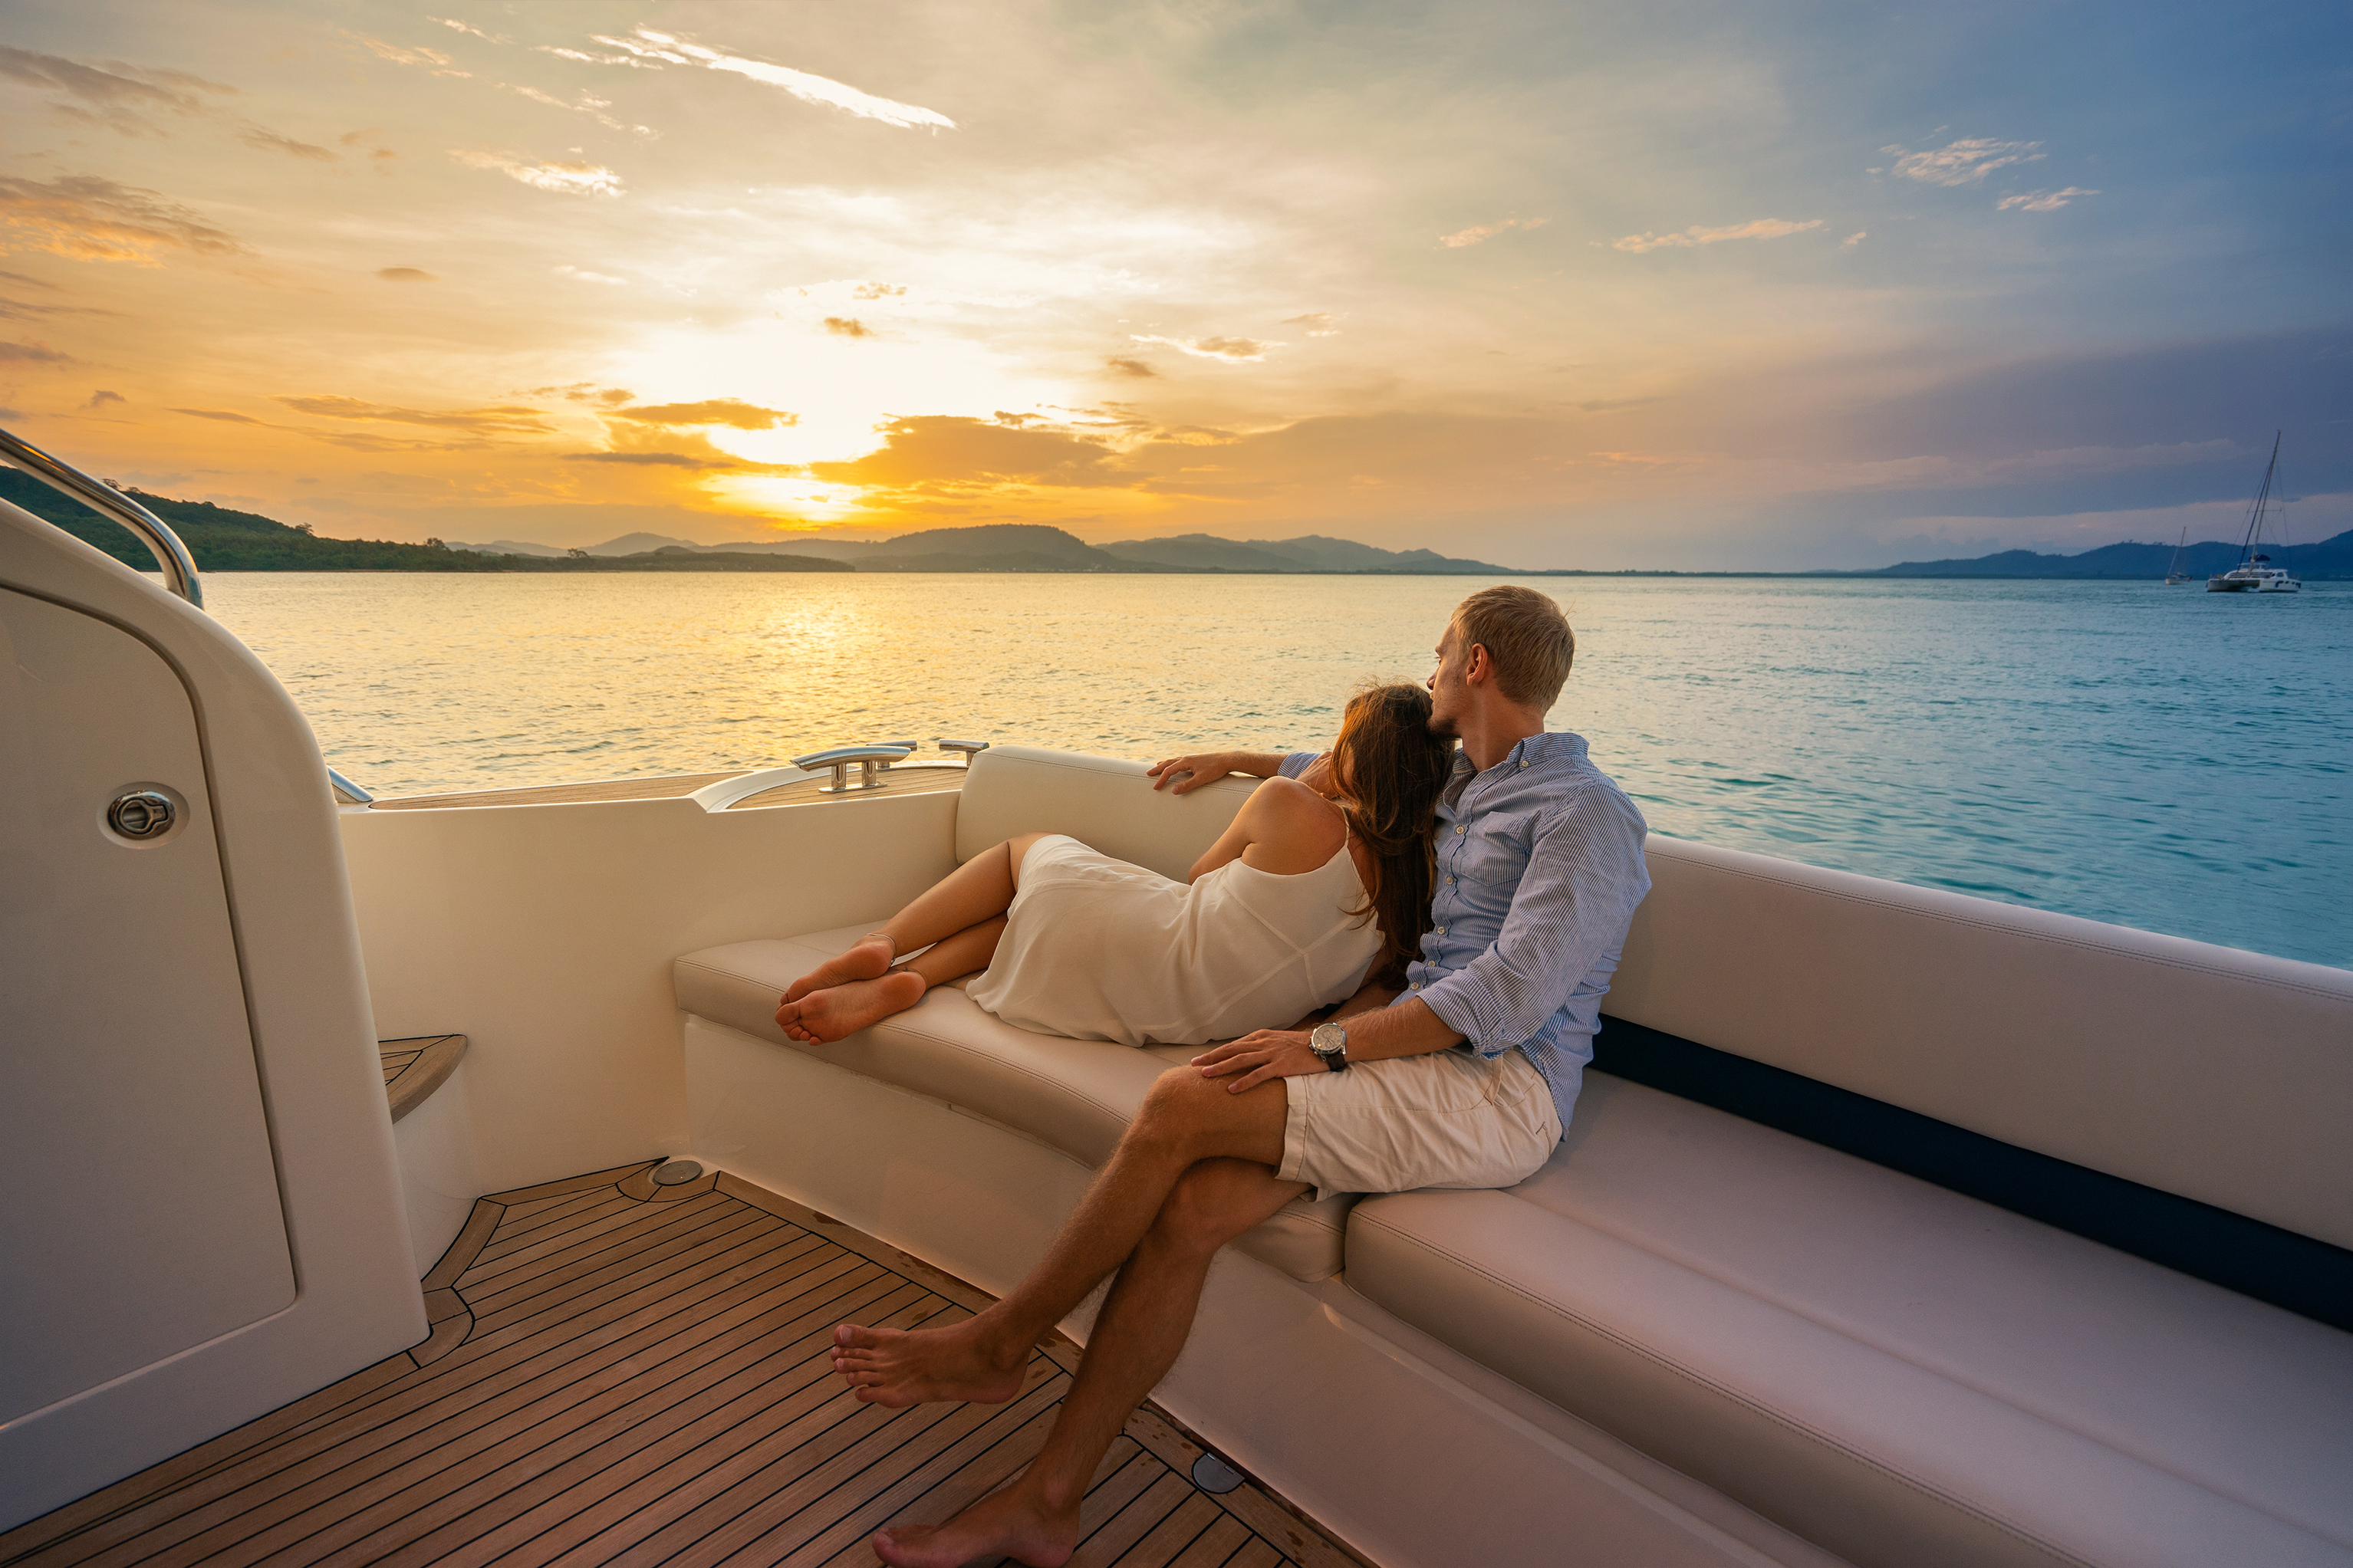 Romantic vacation . Beautiful couple looking in sunset from the yacht. | Source: Shutterstock